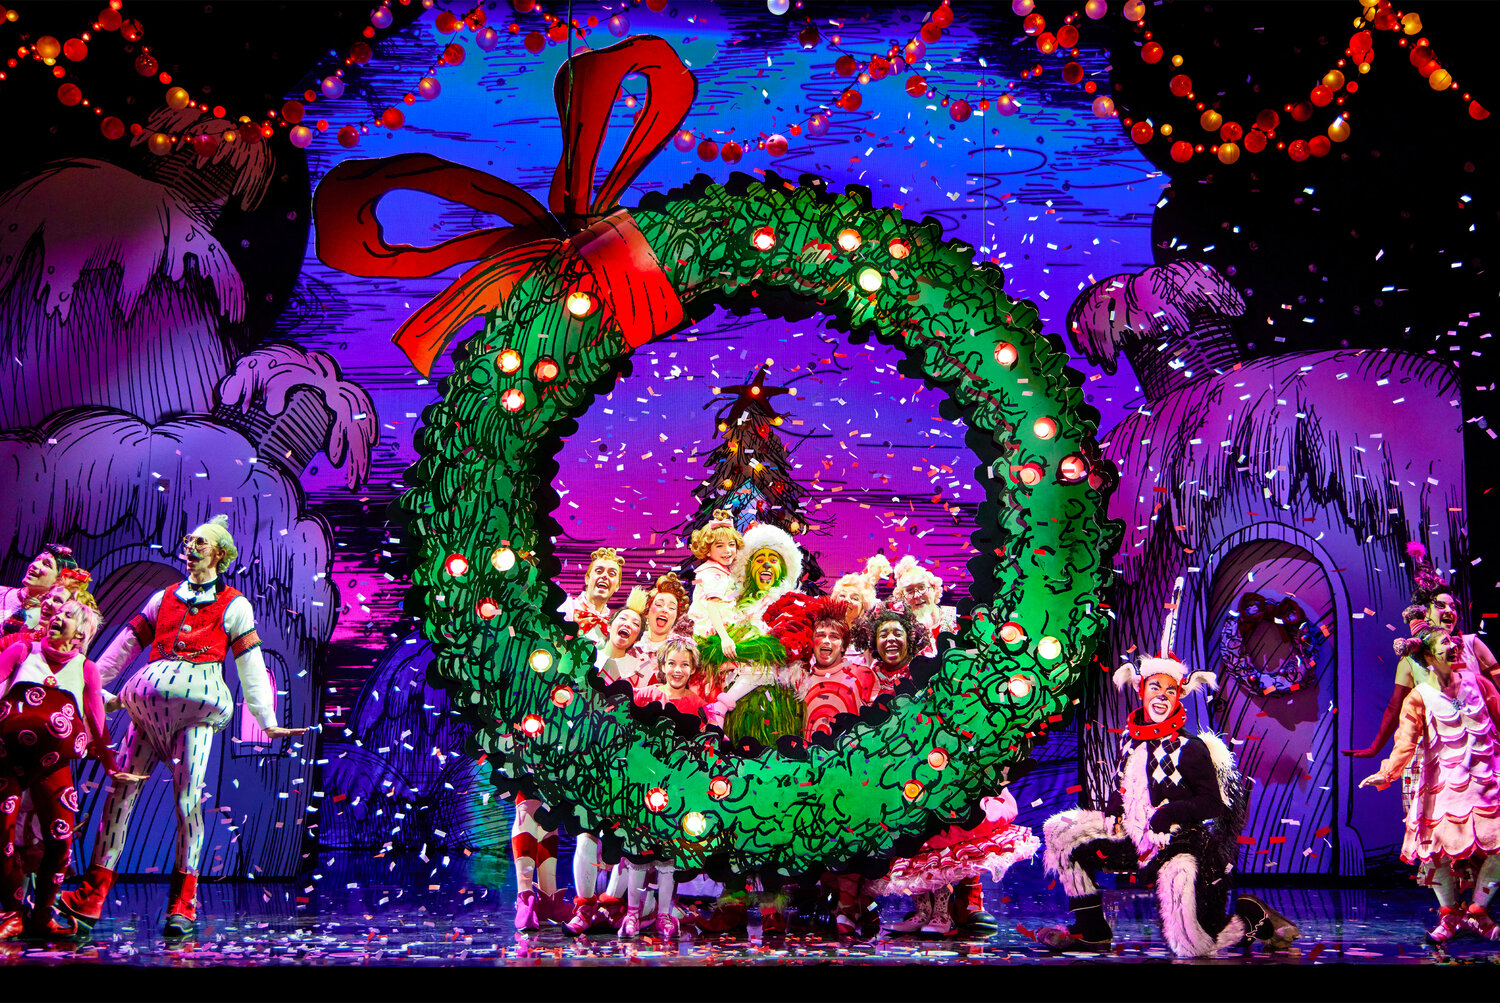 Dr. Seuss’ HOW THE GRINCH STOLE CHRISTMAS! The Musical